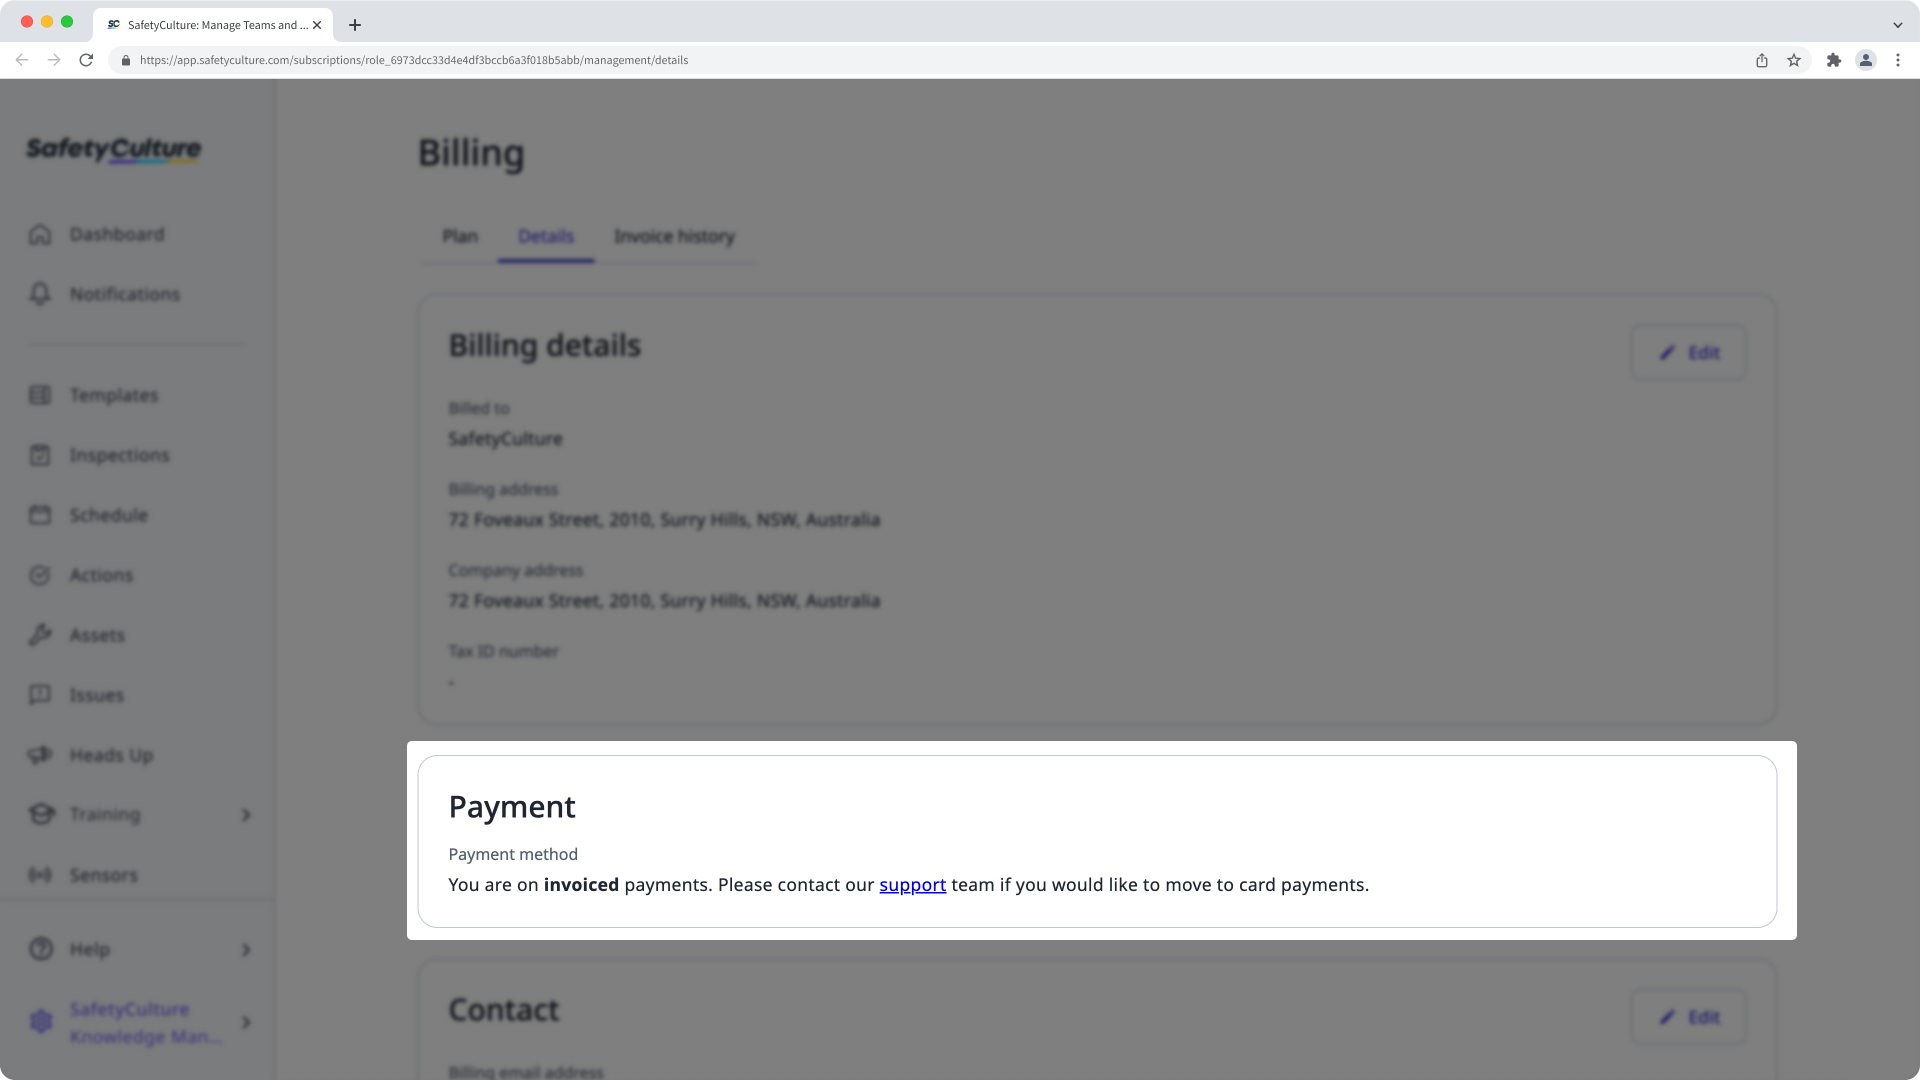 Invoice payment method on the Billing page of the web app.